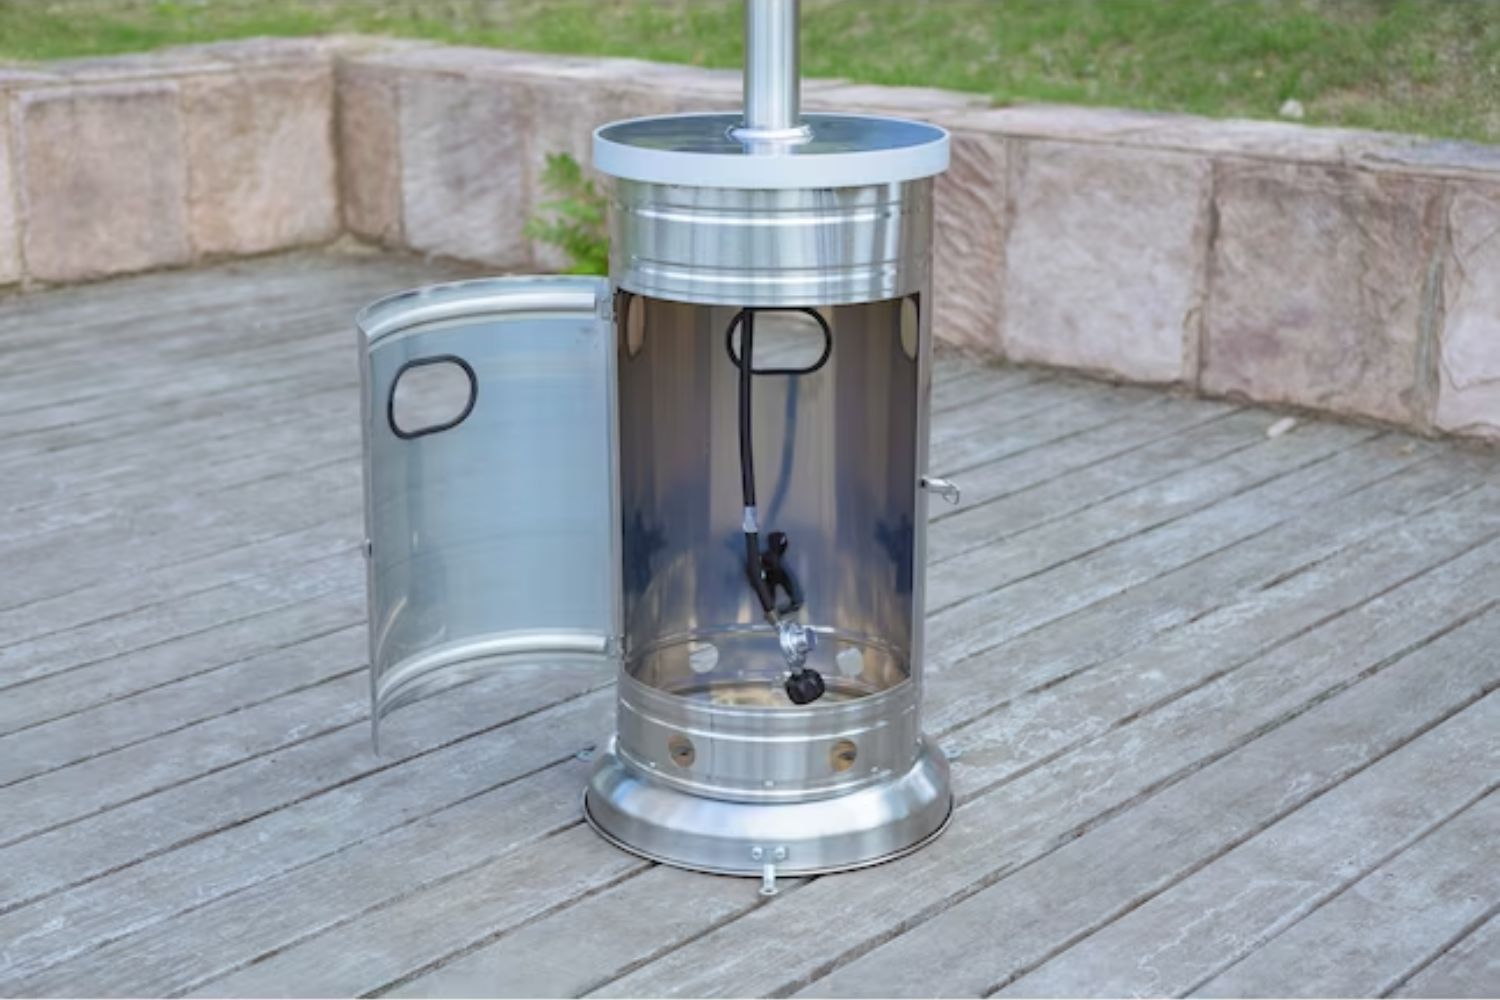 The Best Outdoor Accessories to Shop from Lowe’s Options: Style Selections 48000-BTU Propane Patio Heater